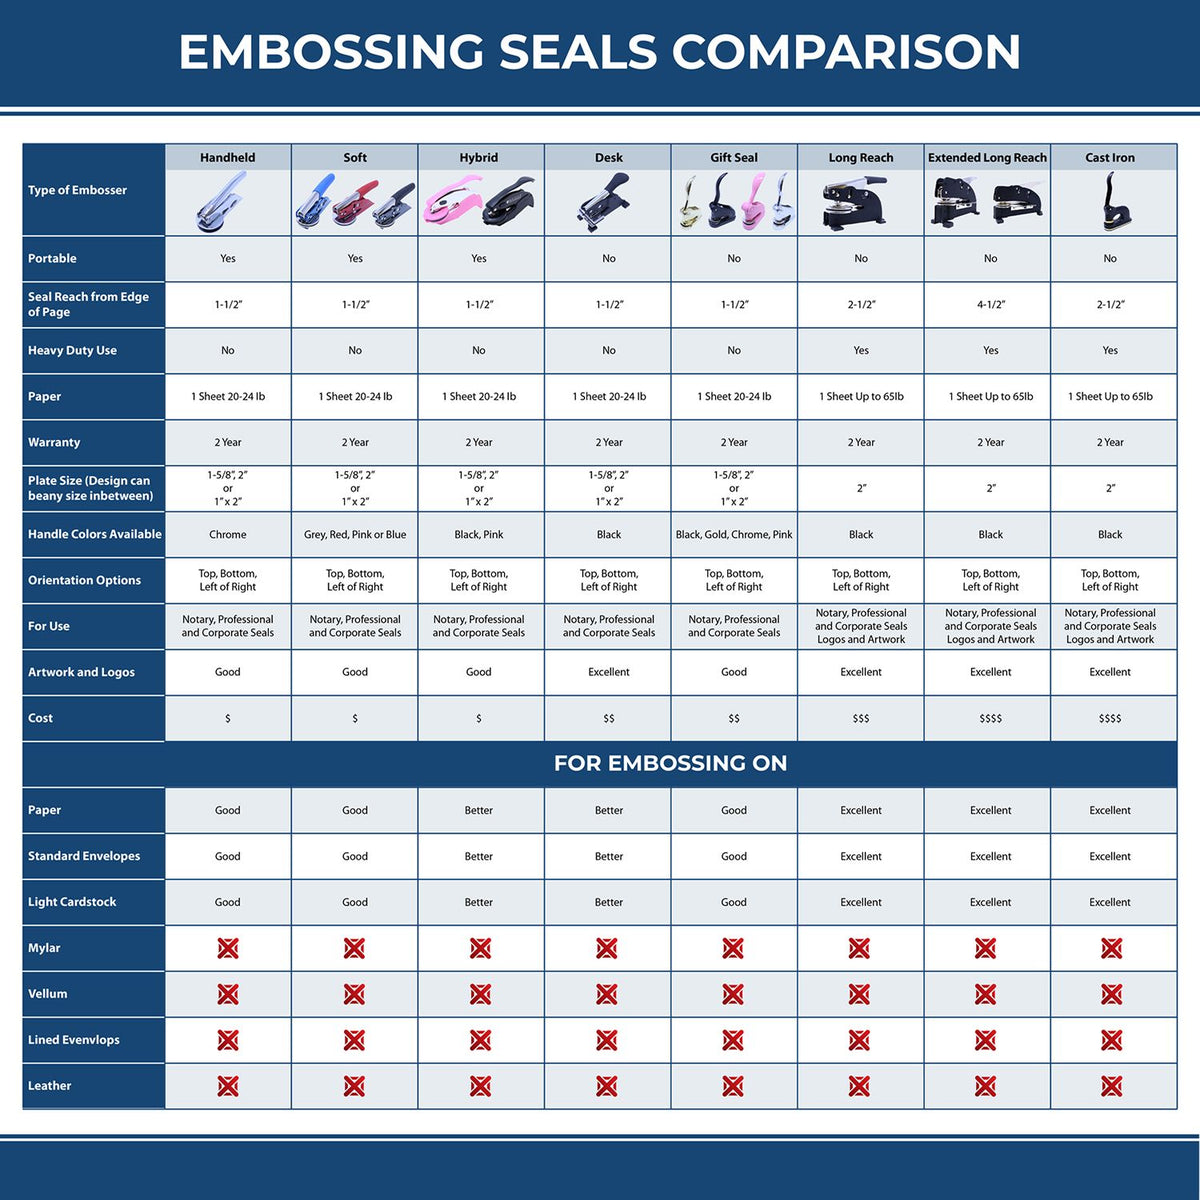 A comparison chart for the different types of mount models available for the Hawaii Desk Surveyor Seal Embosser.